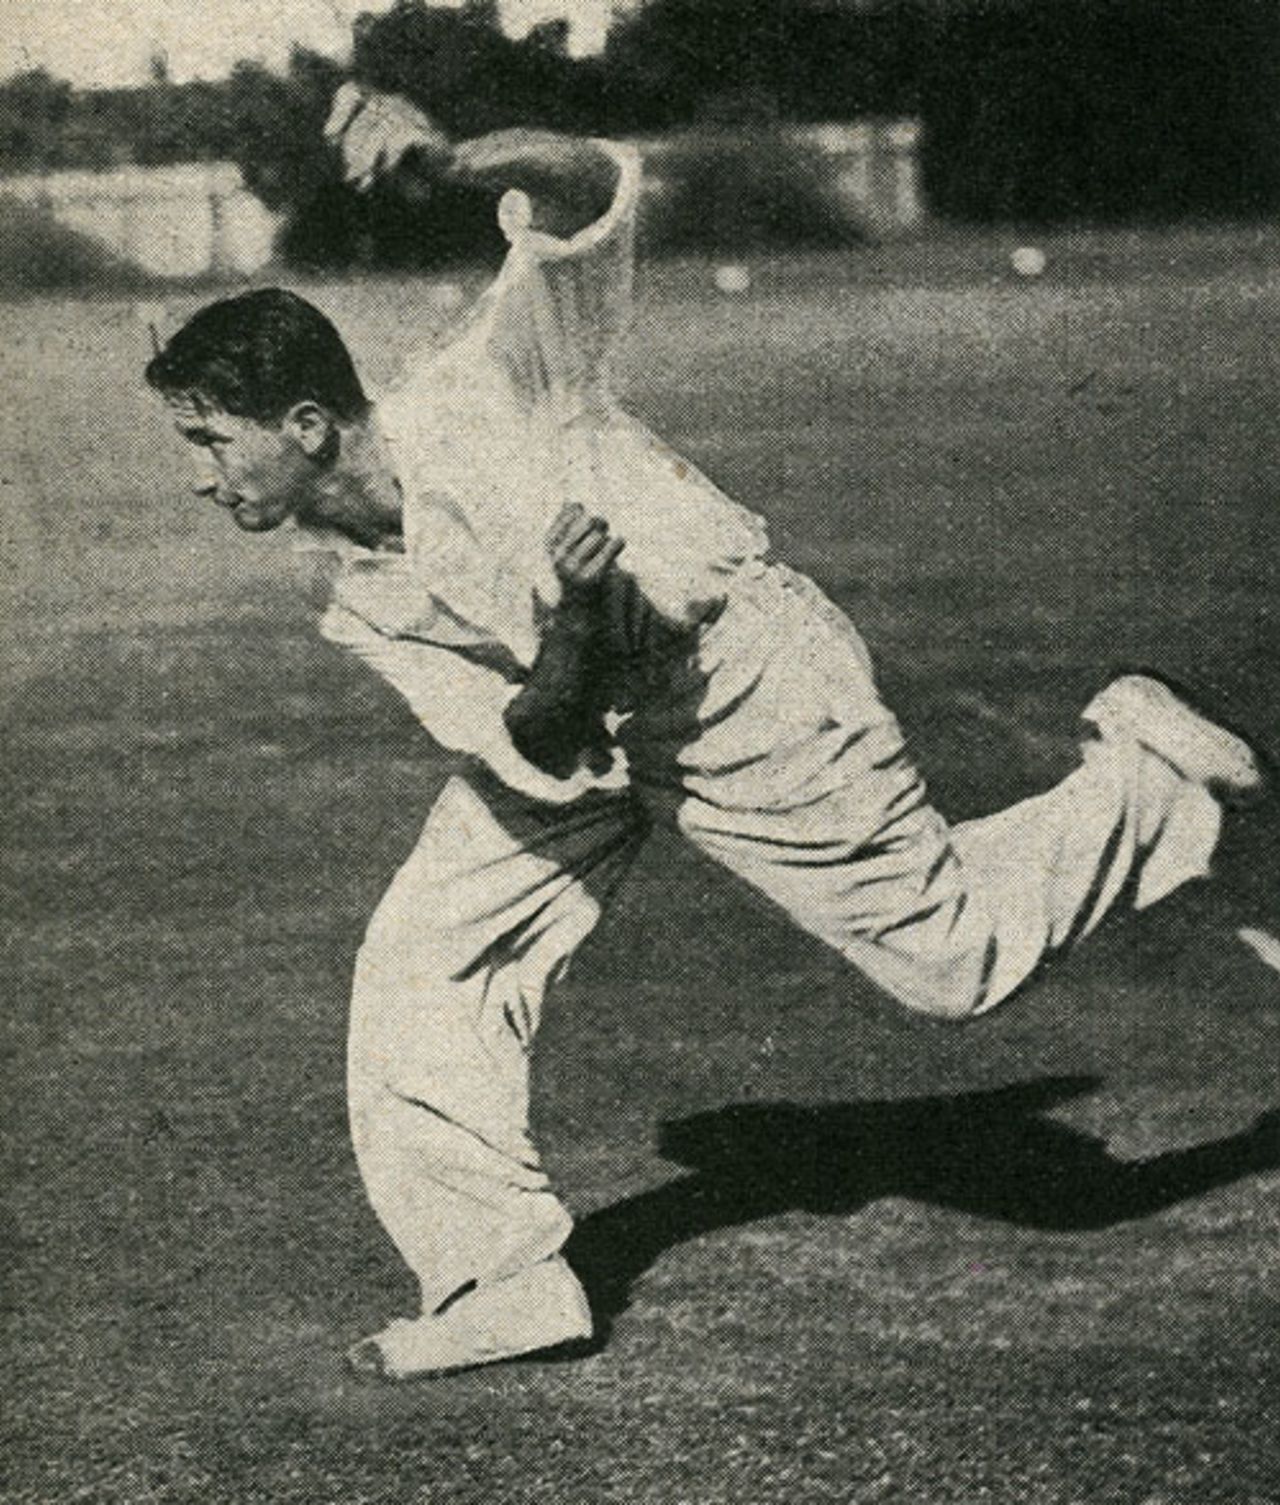 Norman Gordon bowling in the nets at Durban, South Africa v England, 5th Test, Durban, March 8, 1939